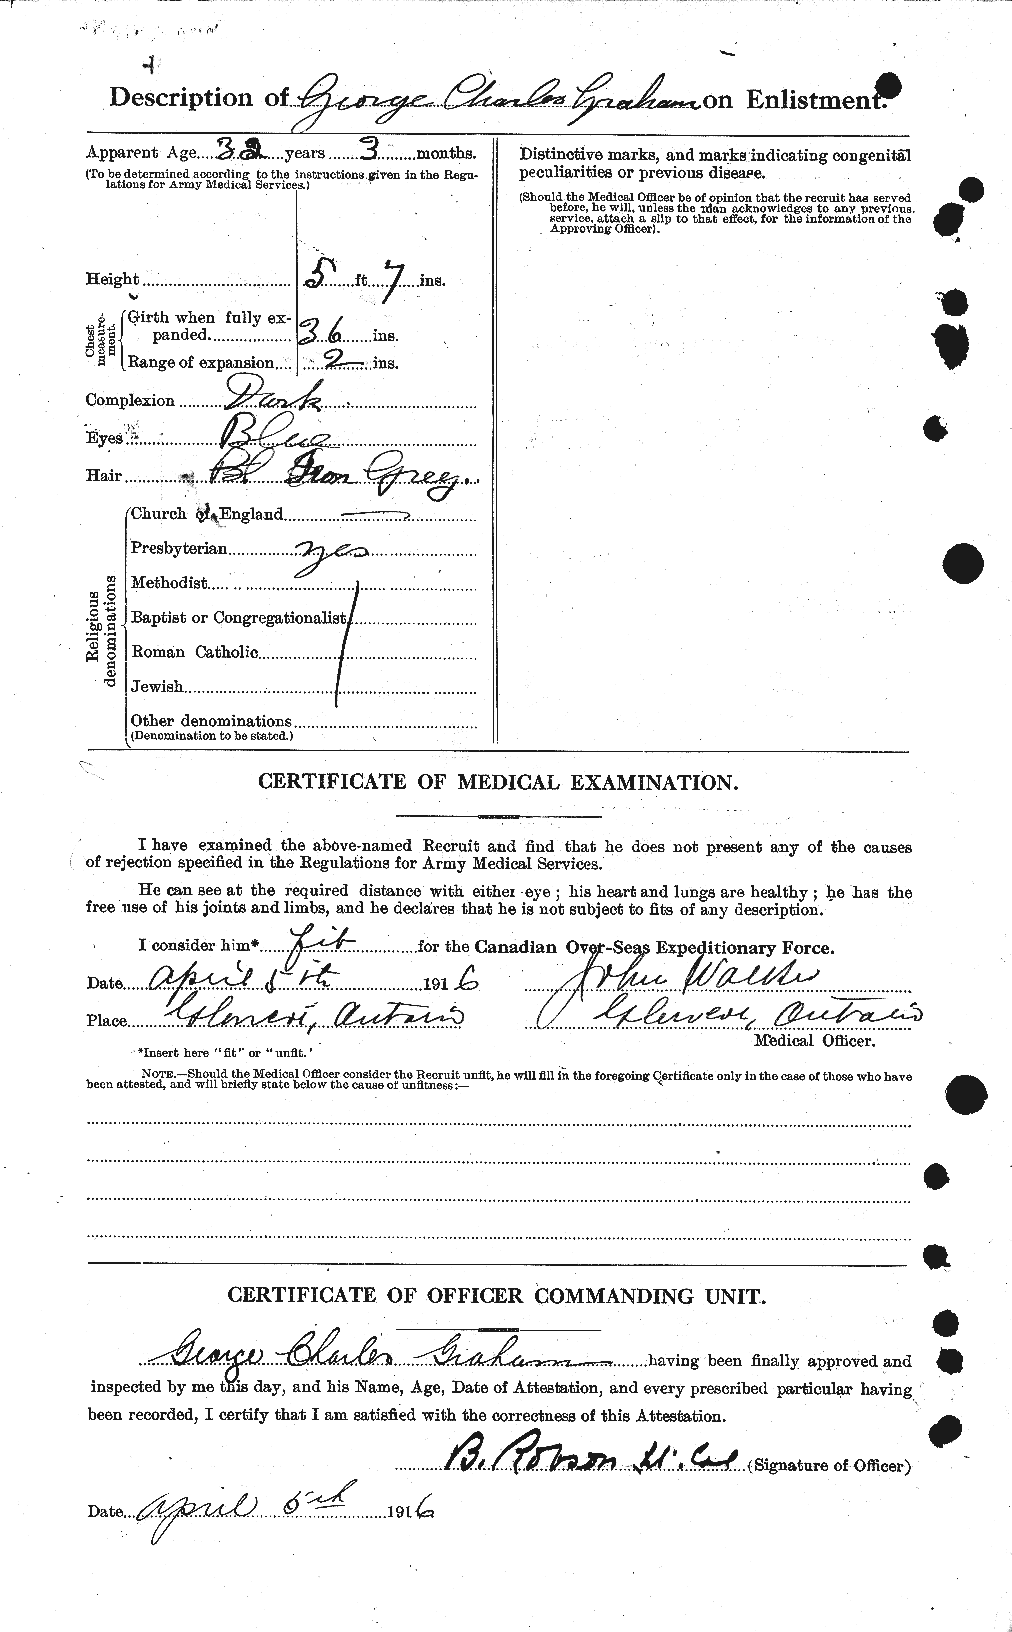 Personnel Records of the First World War - CEF 357649b